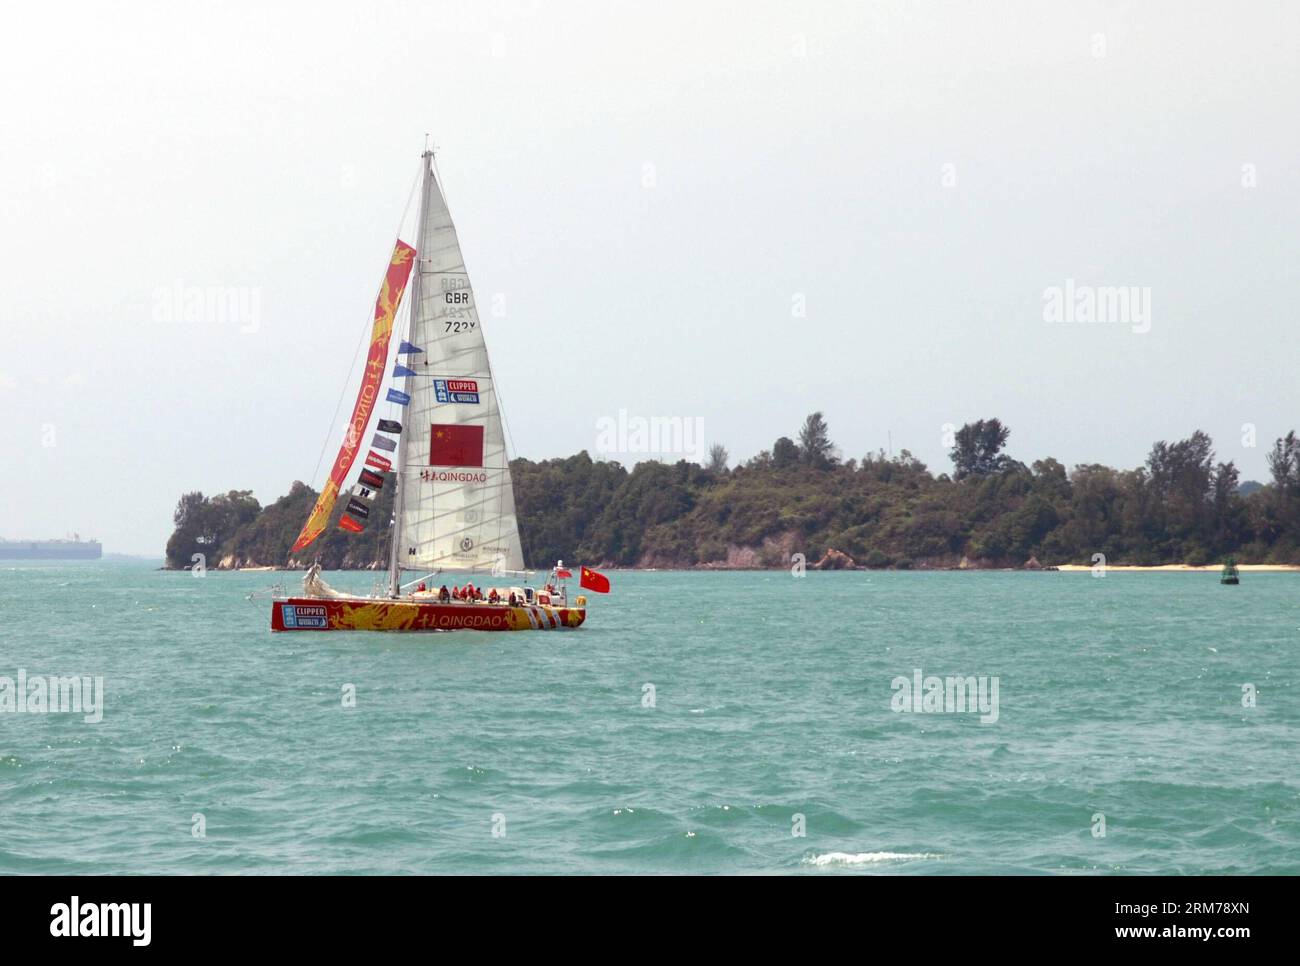 (140219) -- SINGAPORE, Feb. 19, 2014 (Xinhua) -- The Yacht Qingda sails off Sentosa island in Singapore to Qingdao, China, Feb. 19, 2014. The 12-strong fleet of the Clipper Race departed Sentosa Wednesday on a 2,500 nautical mile leg of the race to the Chinese city of Qingdao. With a route of 40,000 nautical miles, Clipper Round the World Race is known as one of the longest round-the-globe yacht races in the world. It is also known as the only round-the-world ocean race that welcomes novices from all over the world and turn them into ocean racers. (Xinhua/Chen Jipeng) (SP)SINGAPORE-CHINA-QINGD Stock Photo